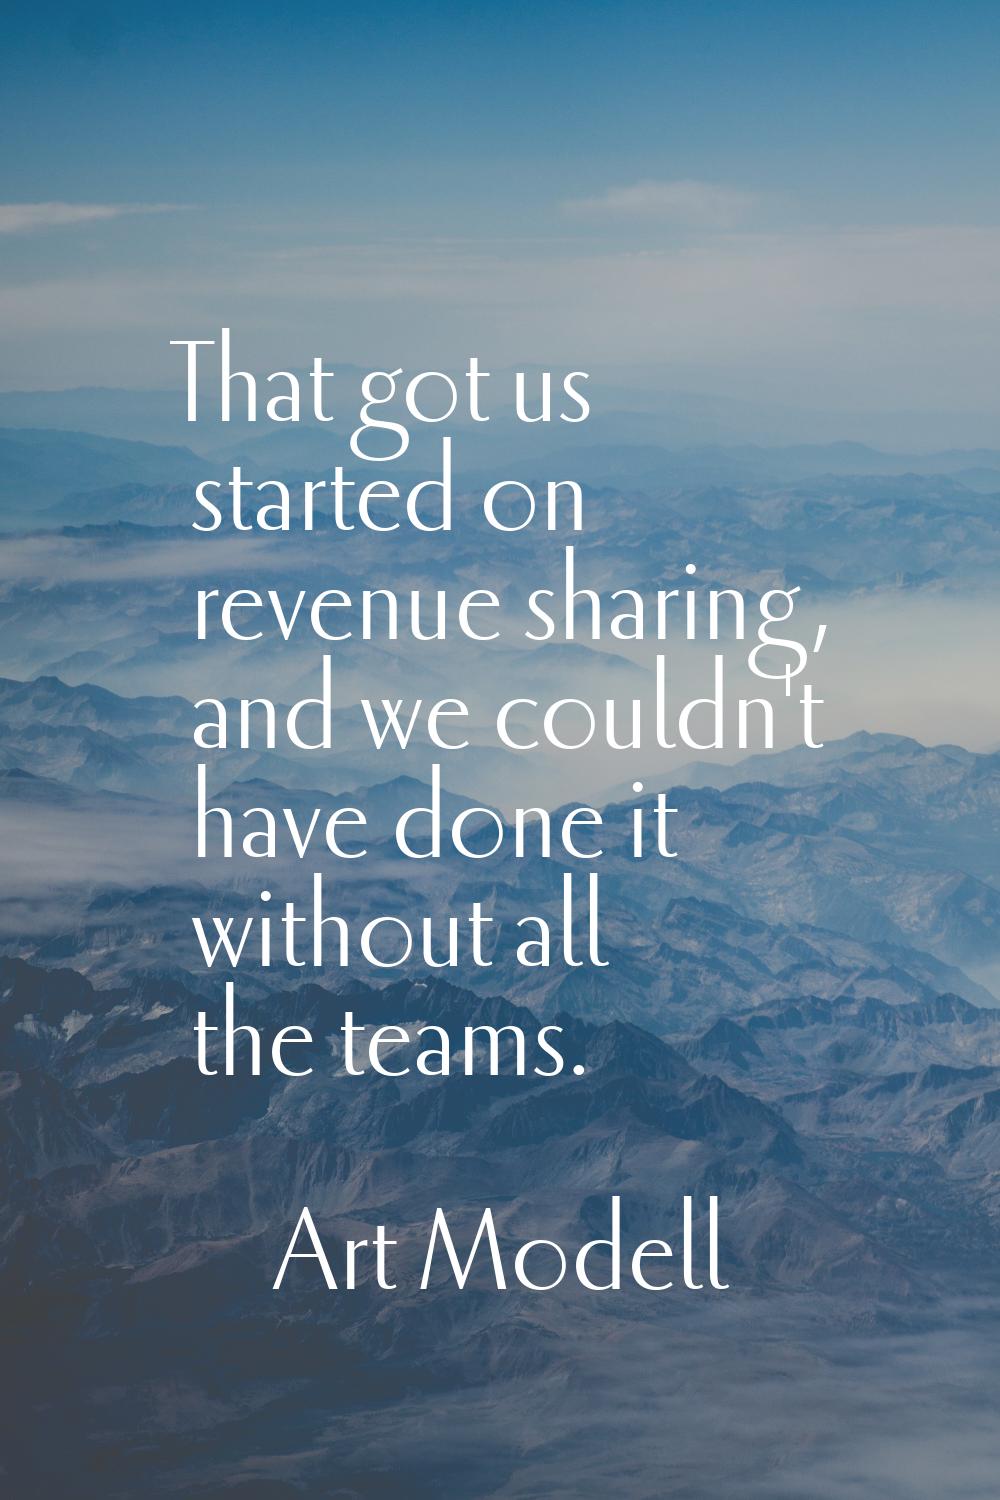 That got us started on revenue sharing, and we couldn't have done it without all the teams.